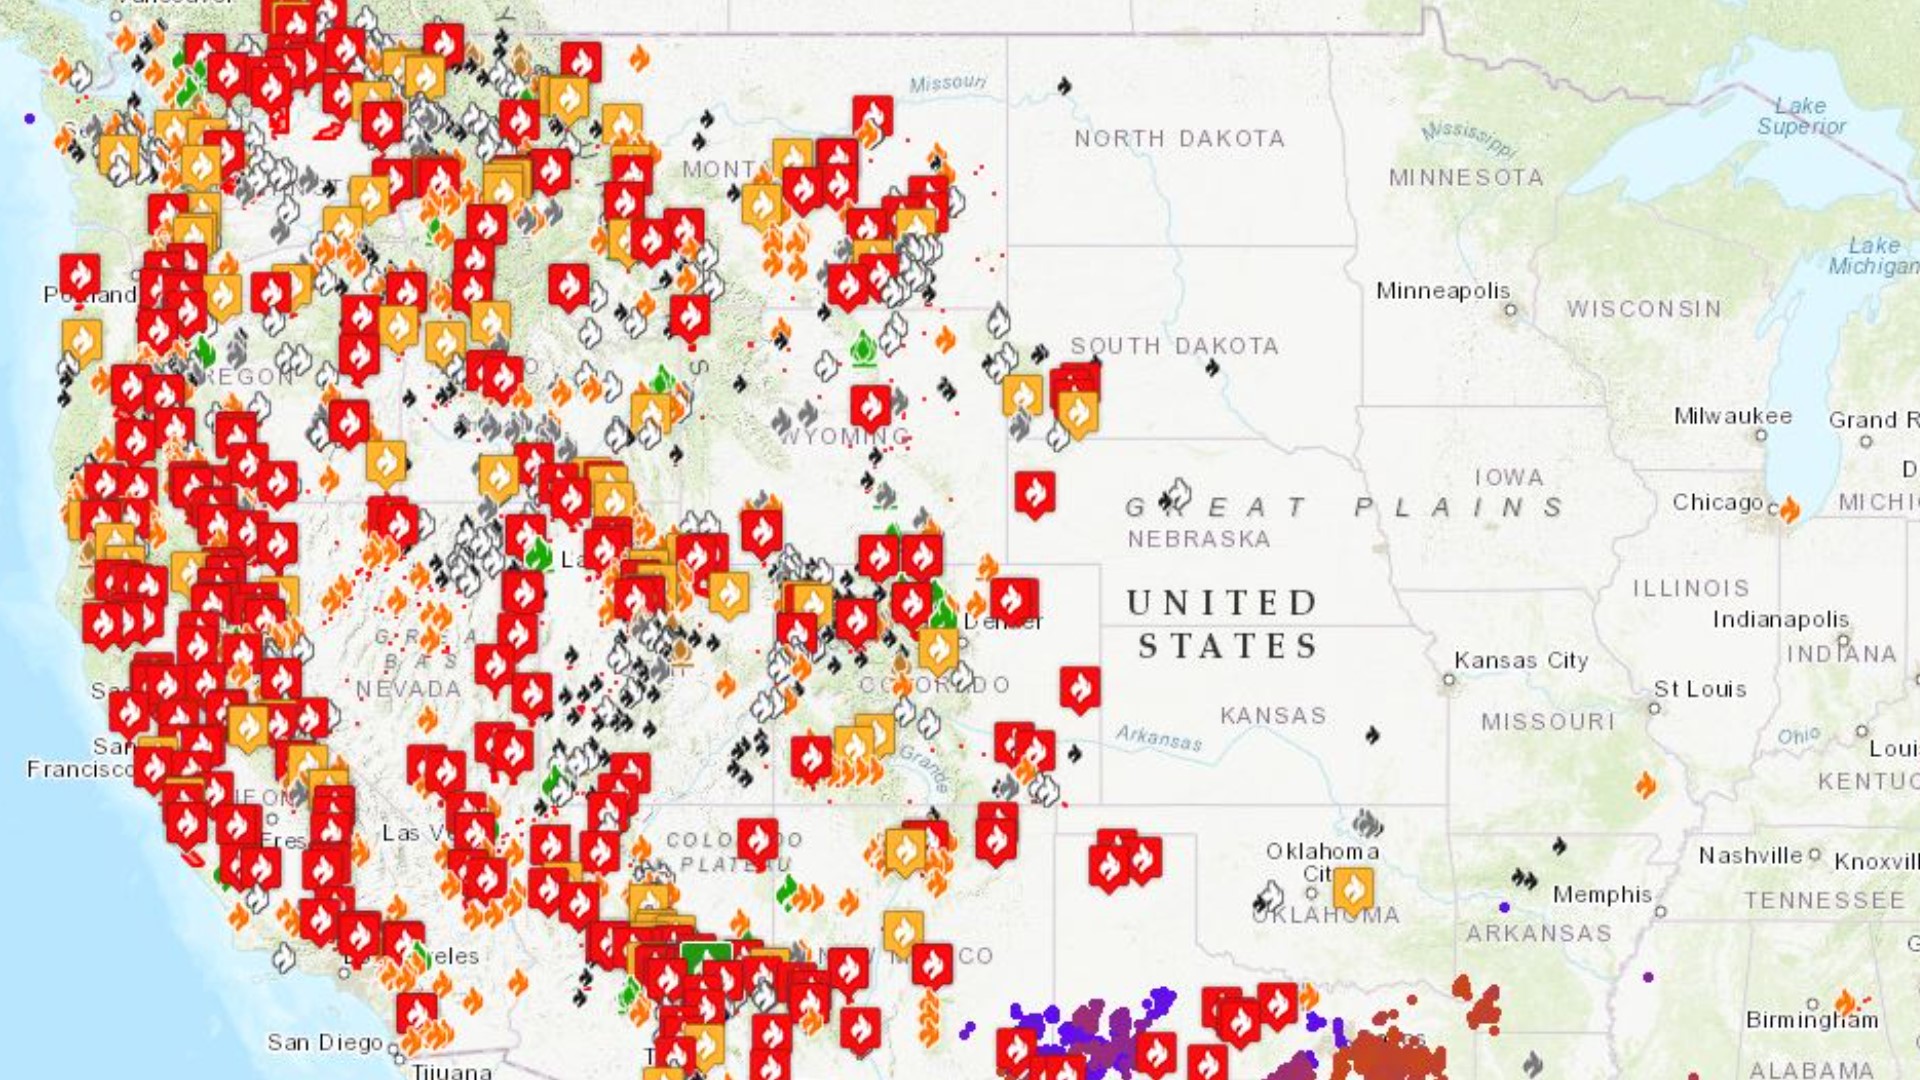 West coast wild fires map, do the wildfires stop in Canada?